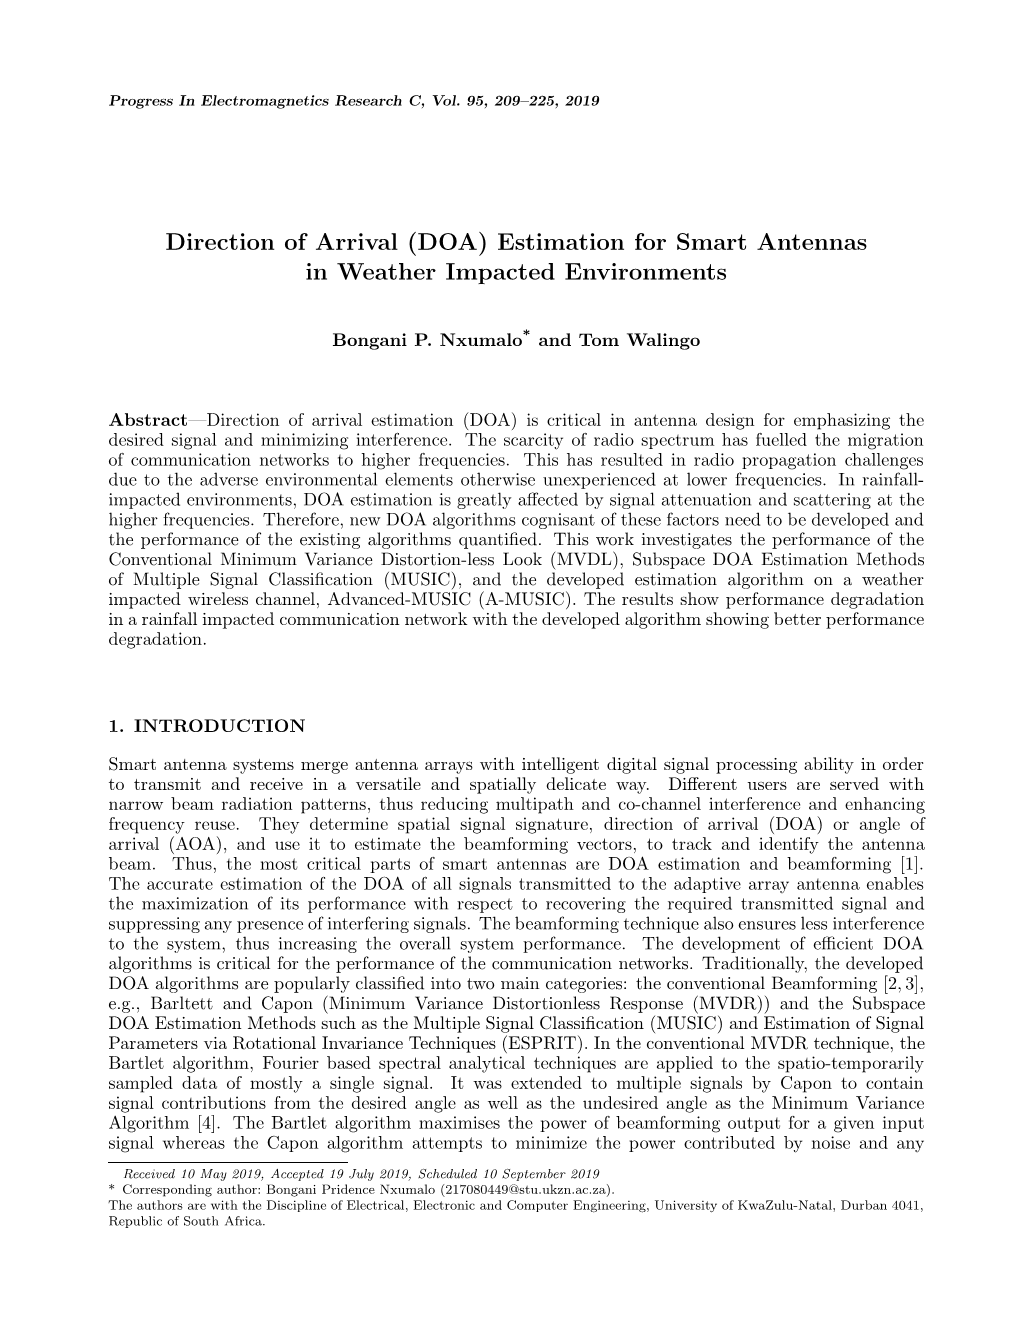 DOA) Estimation for Smart Antennas in Weather Impacted Environments